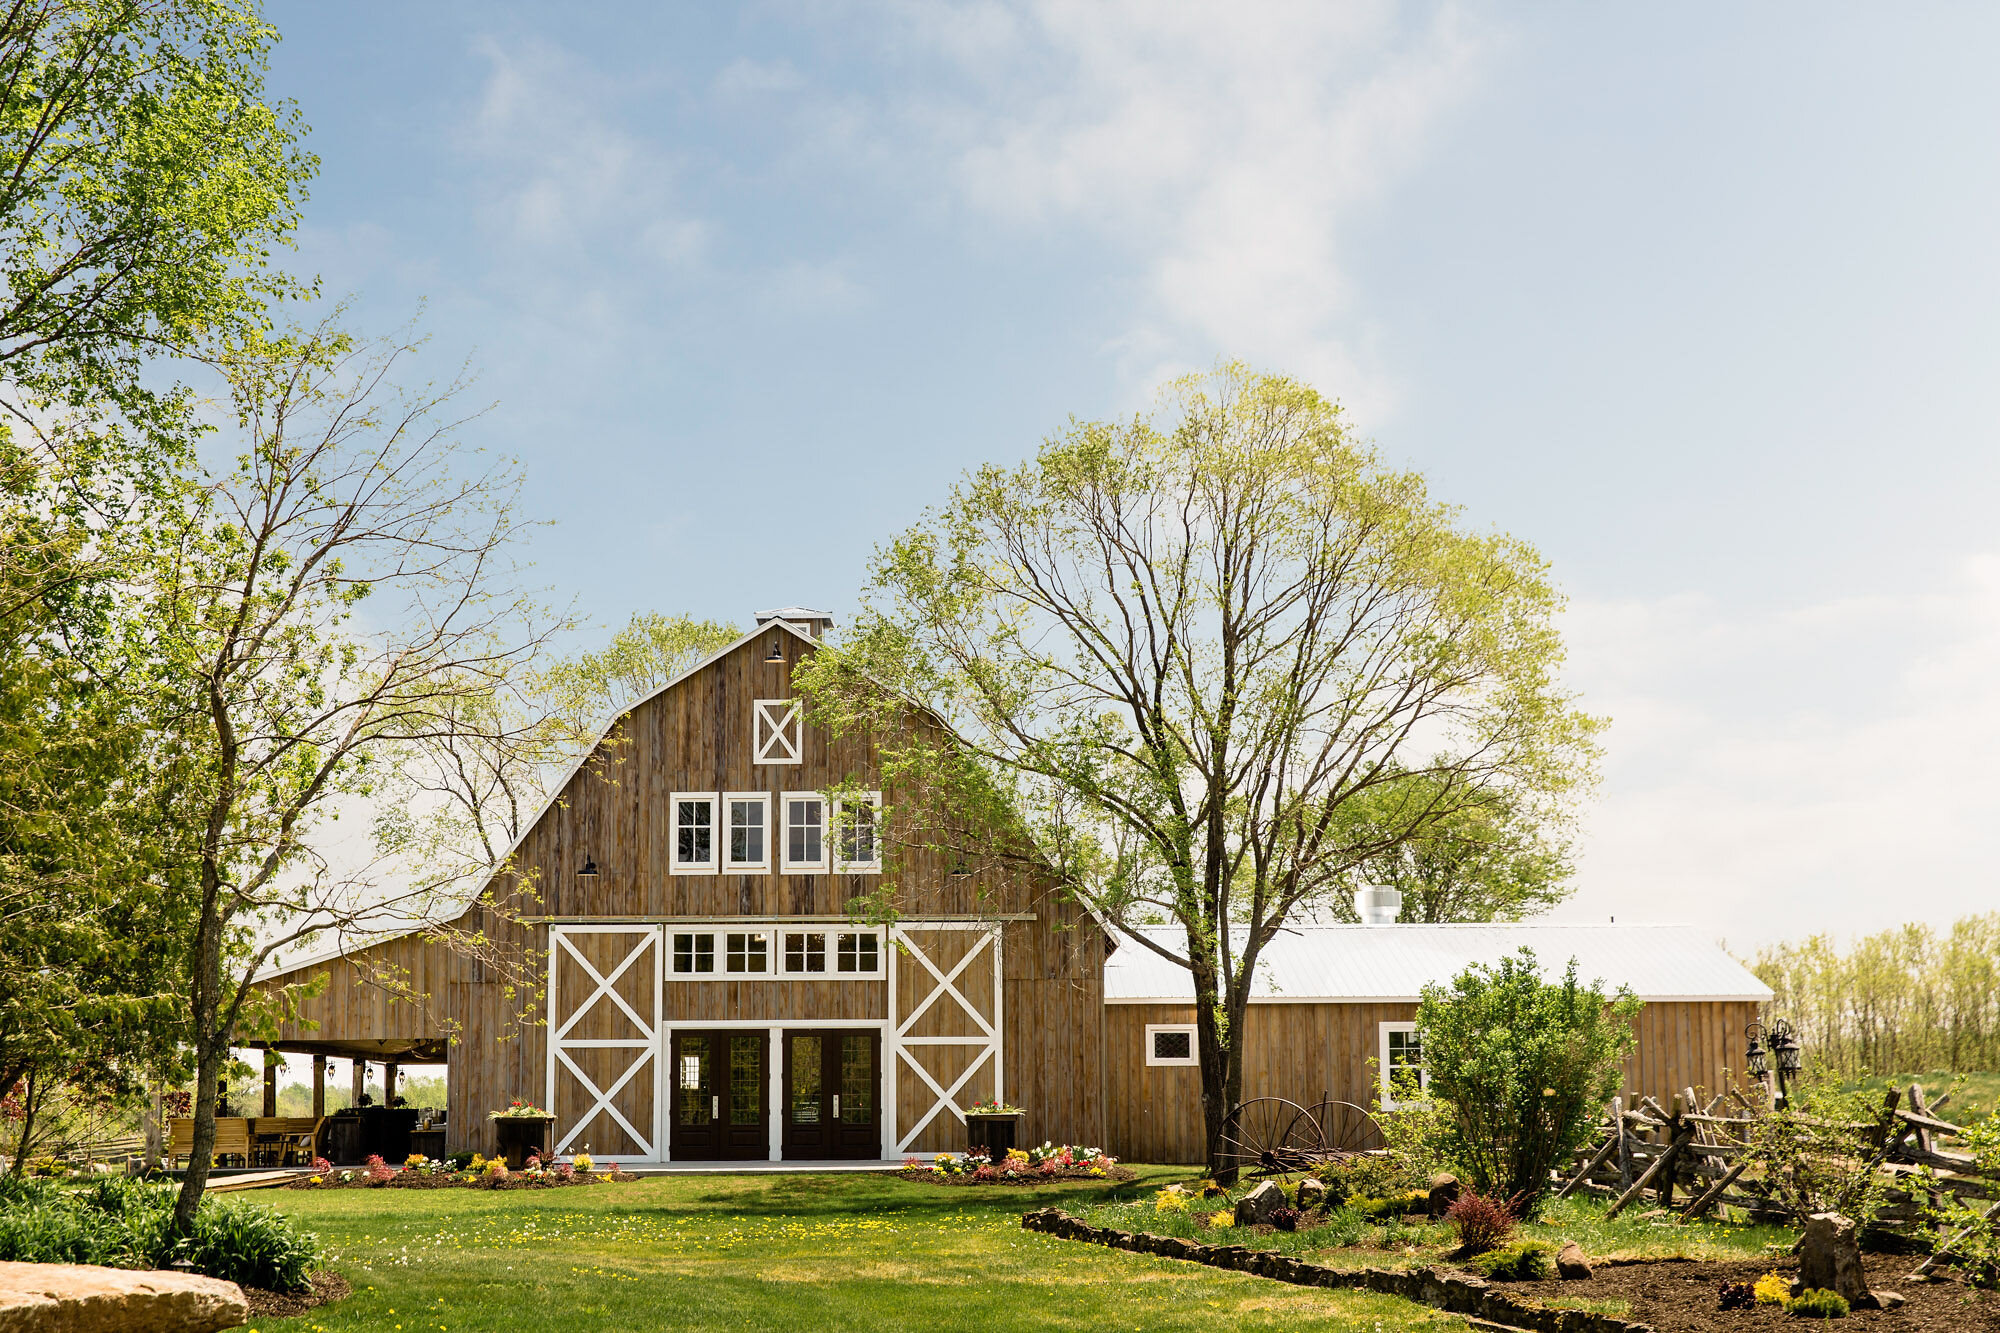 Photograph of the Loft country barn at Stonefields Estate in Beckwith, Ontario